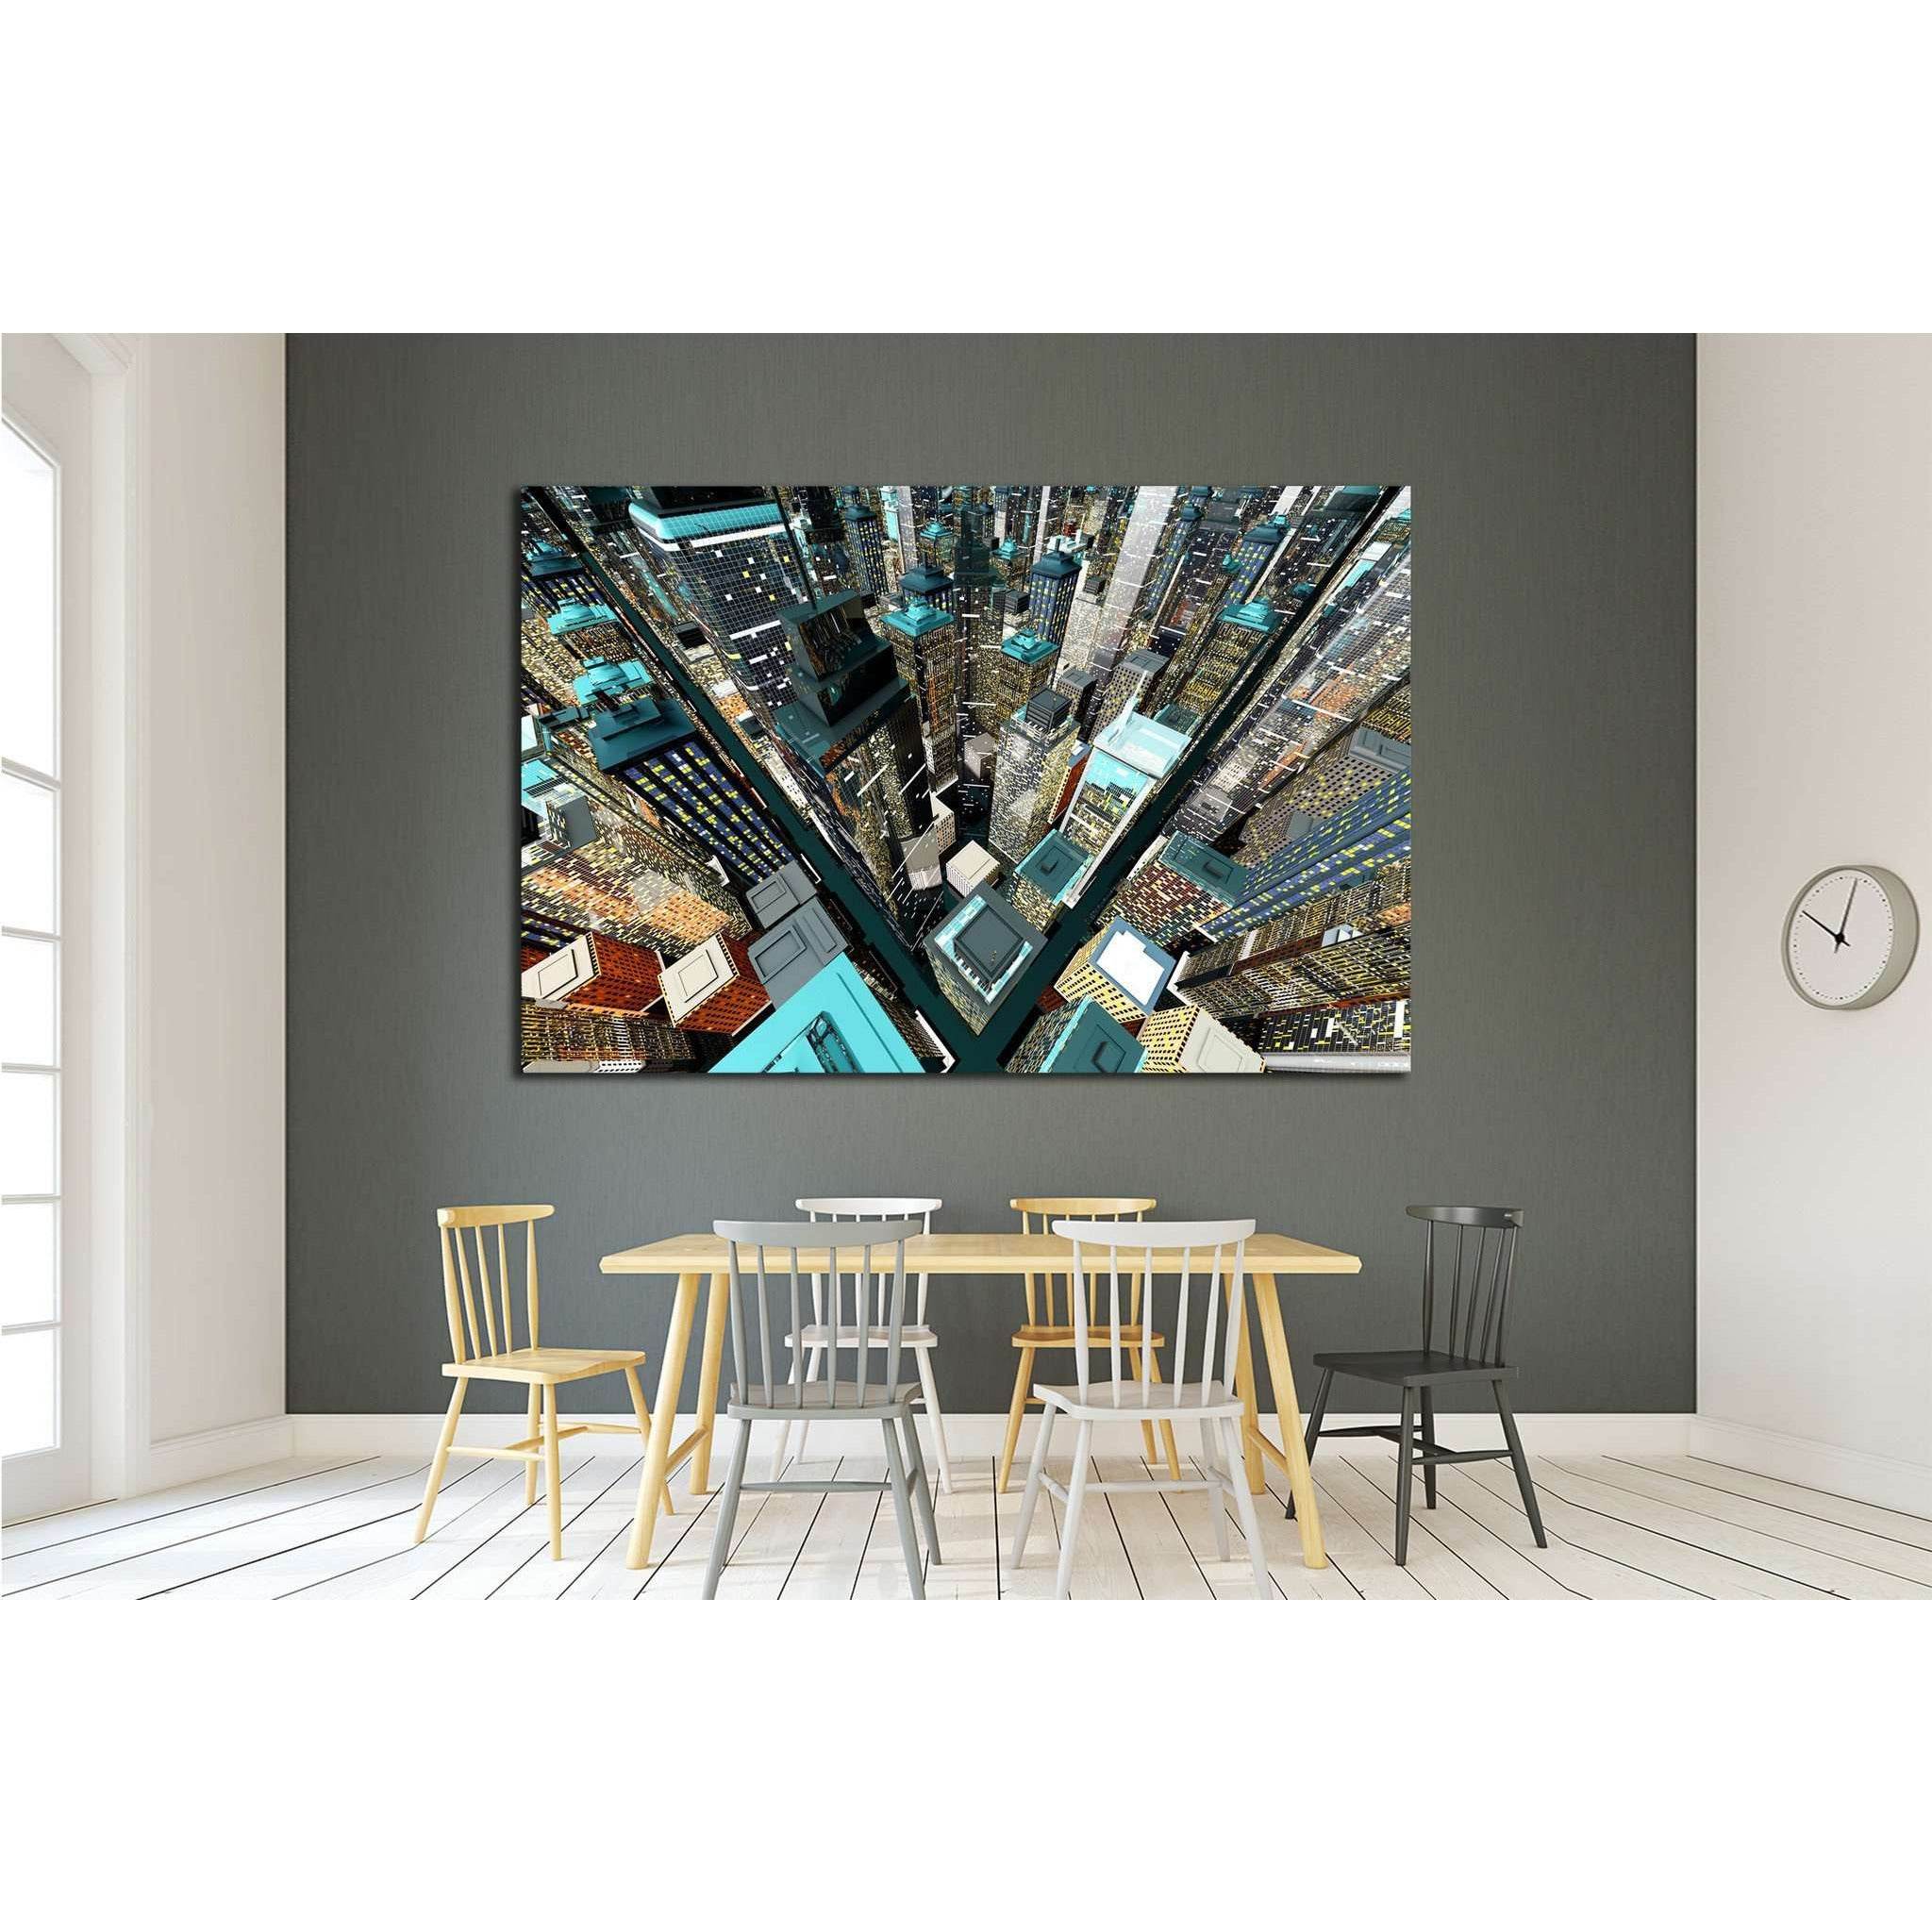 Generic urban architecture and skyscrapers forming a huge city №2048 Ready to Hang Canvas Print